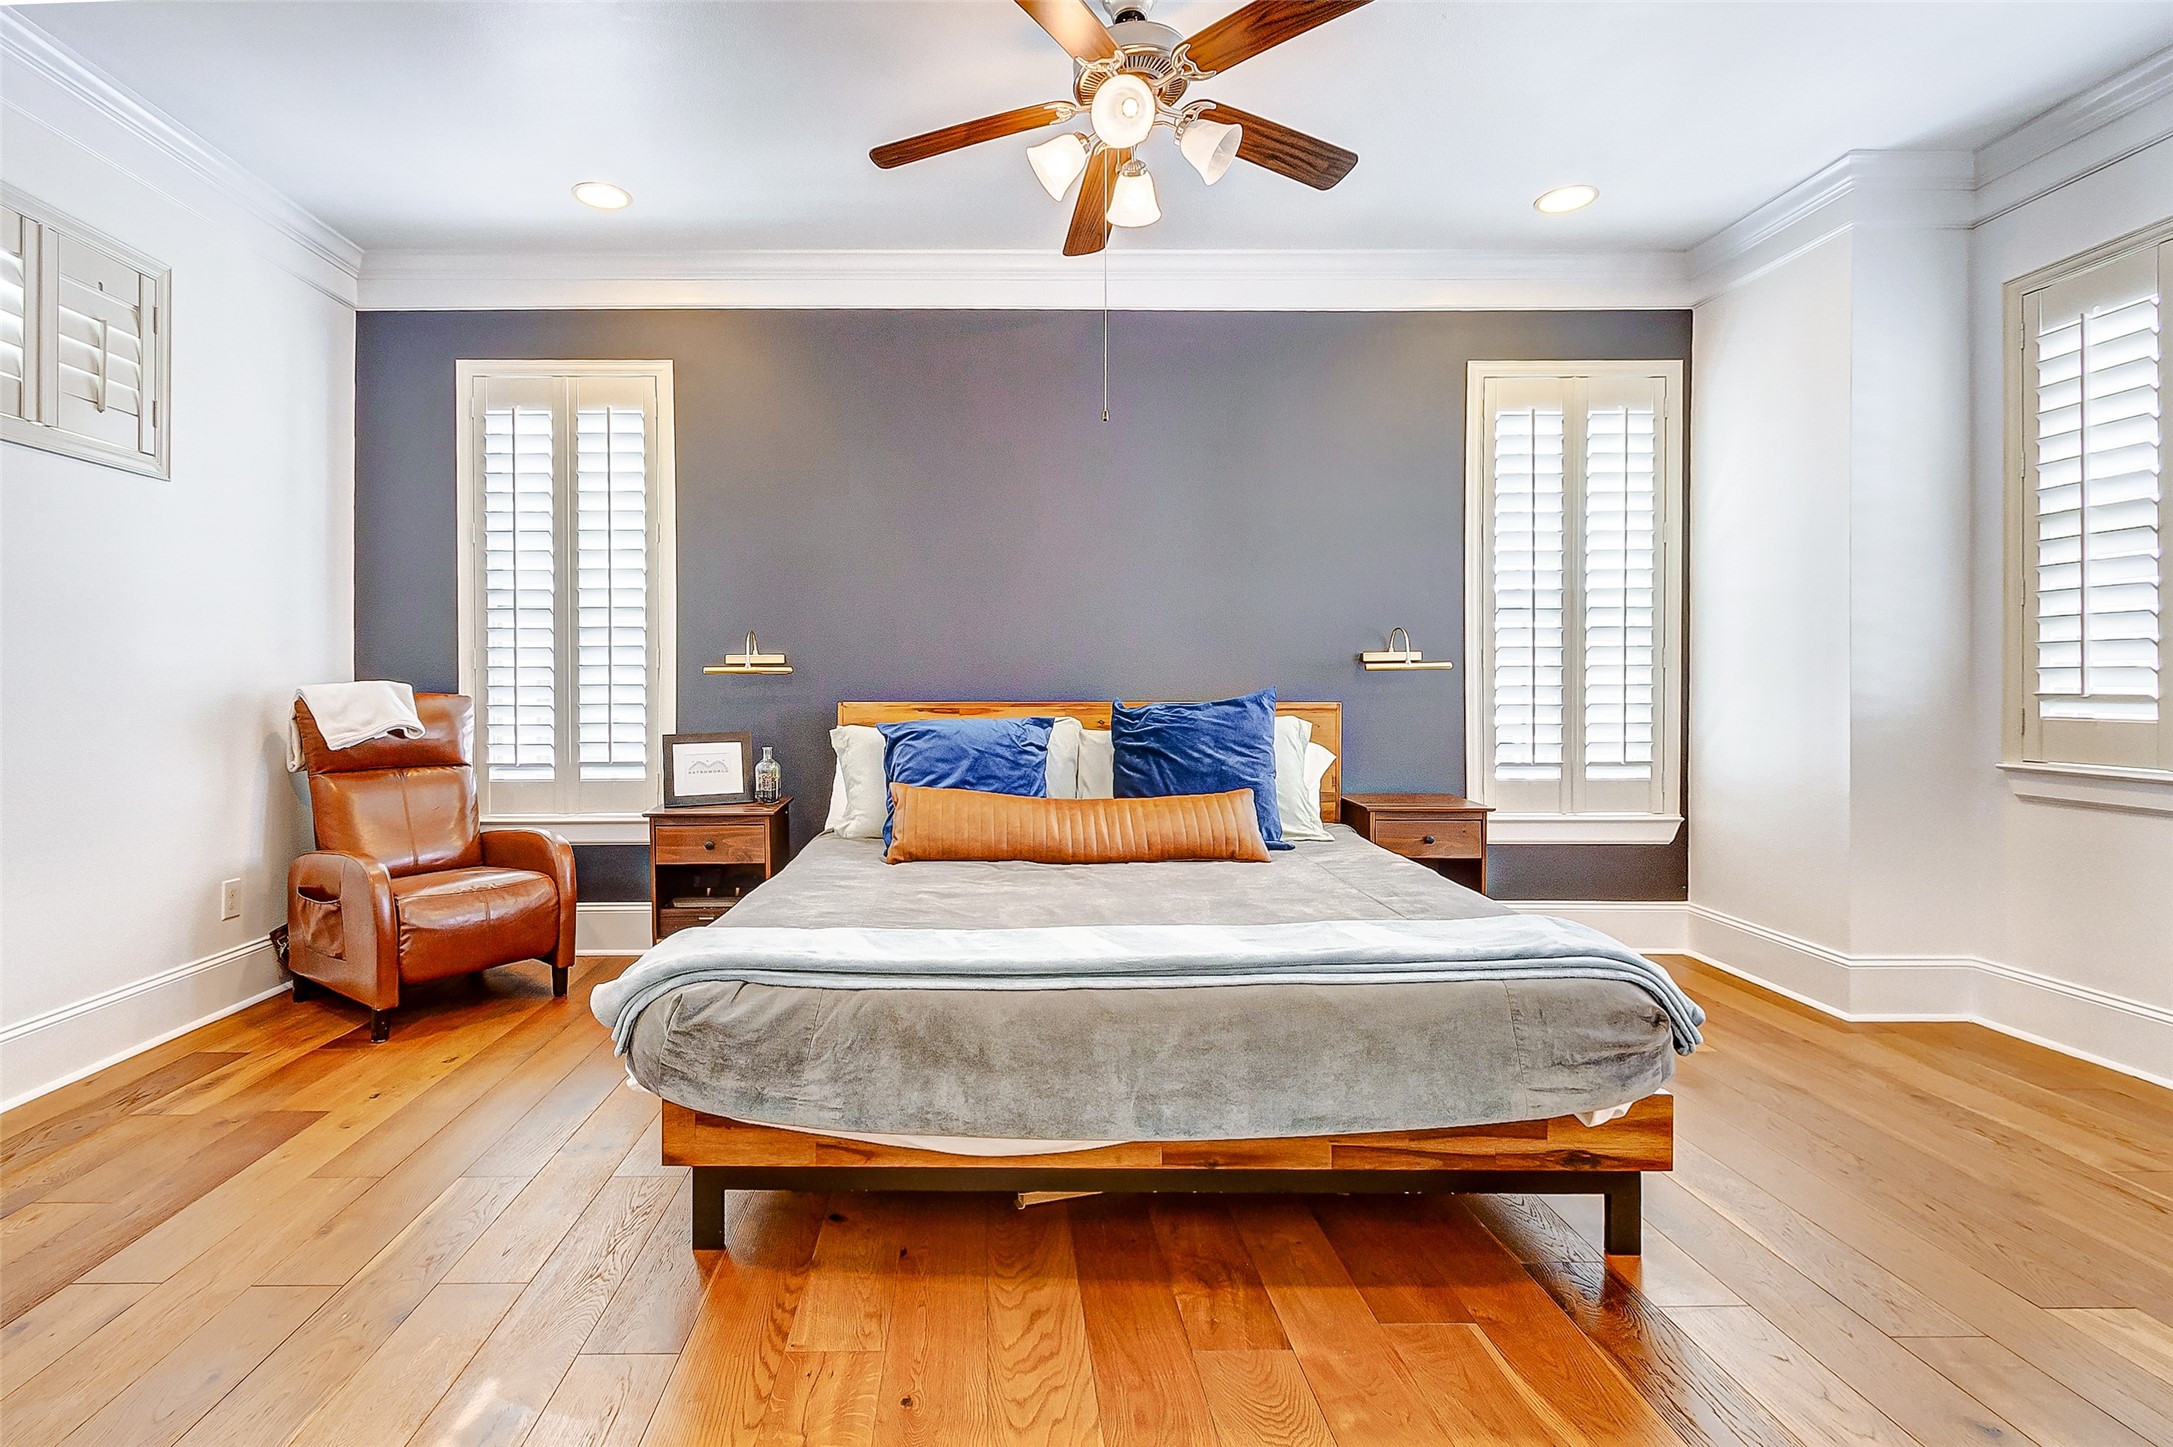 Welcome to your lovely primary suite atop the third floor offering plentiful views, an abundance of natural lighting, gorgeous wood flooring, designer accent wall, crown-molding, plantation shutters, and your own private bathroom.